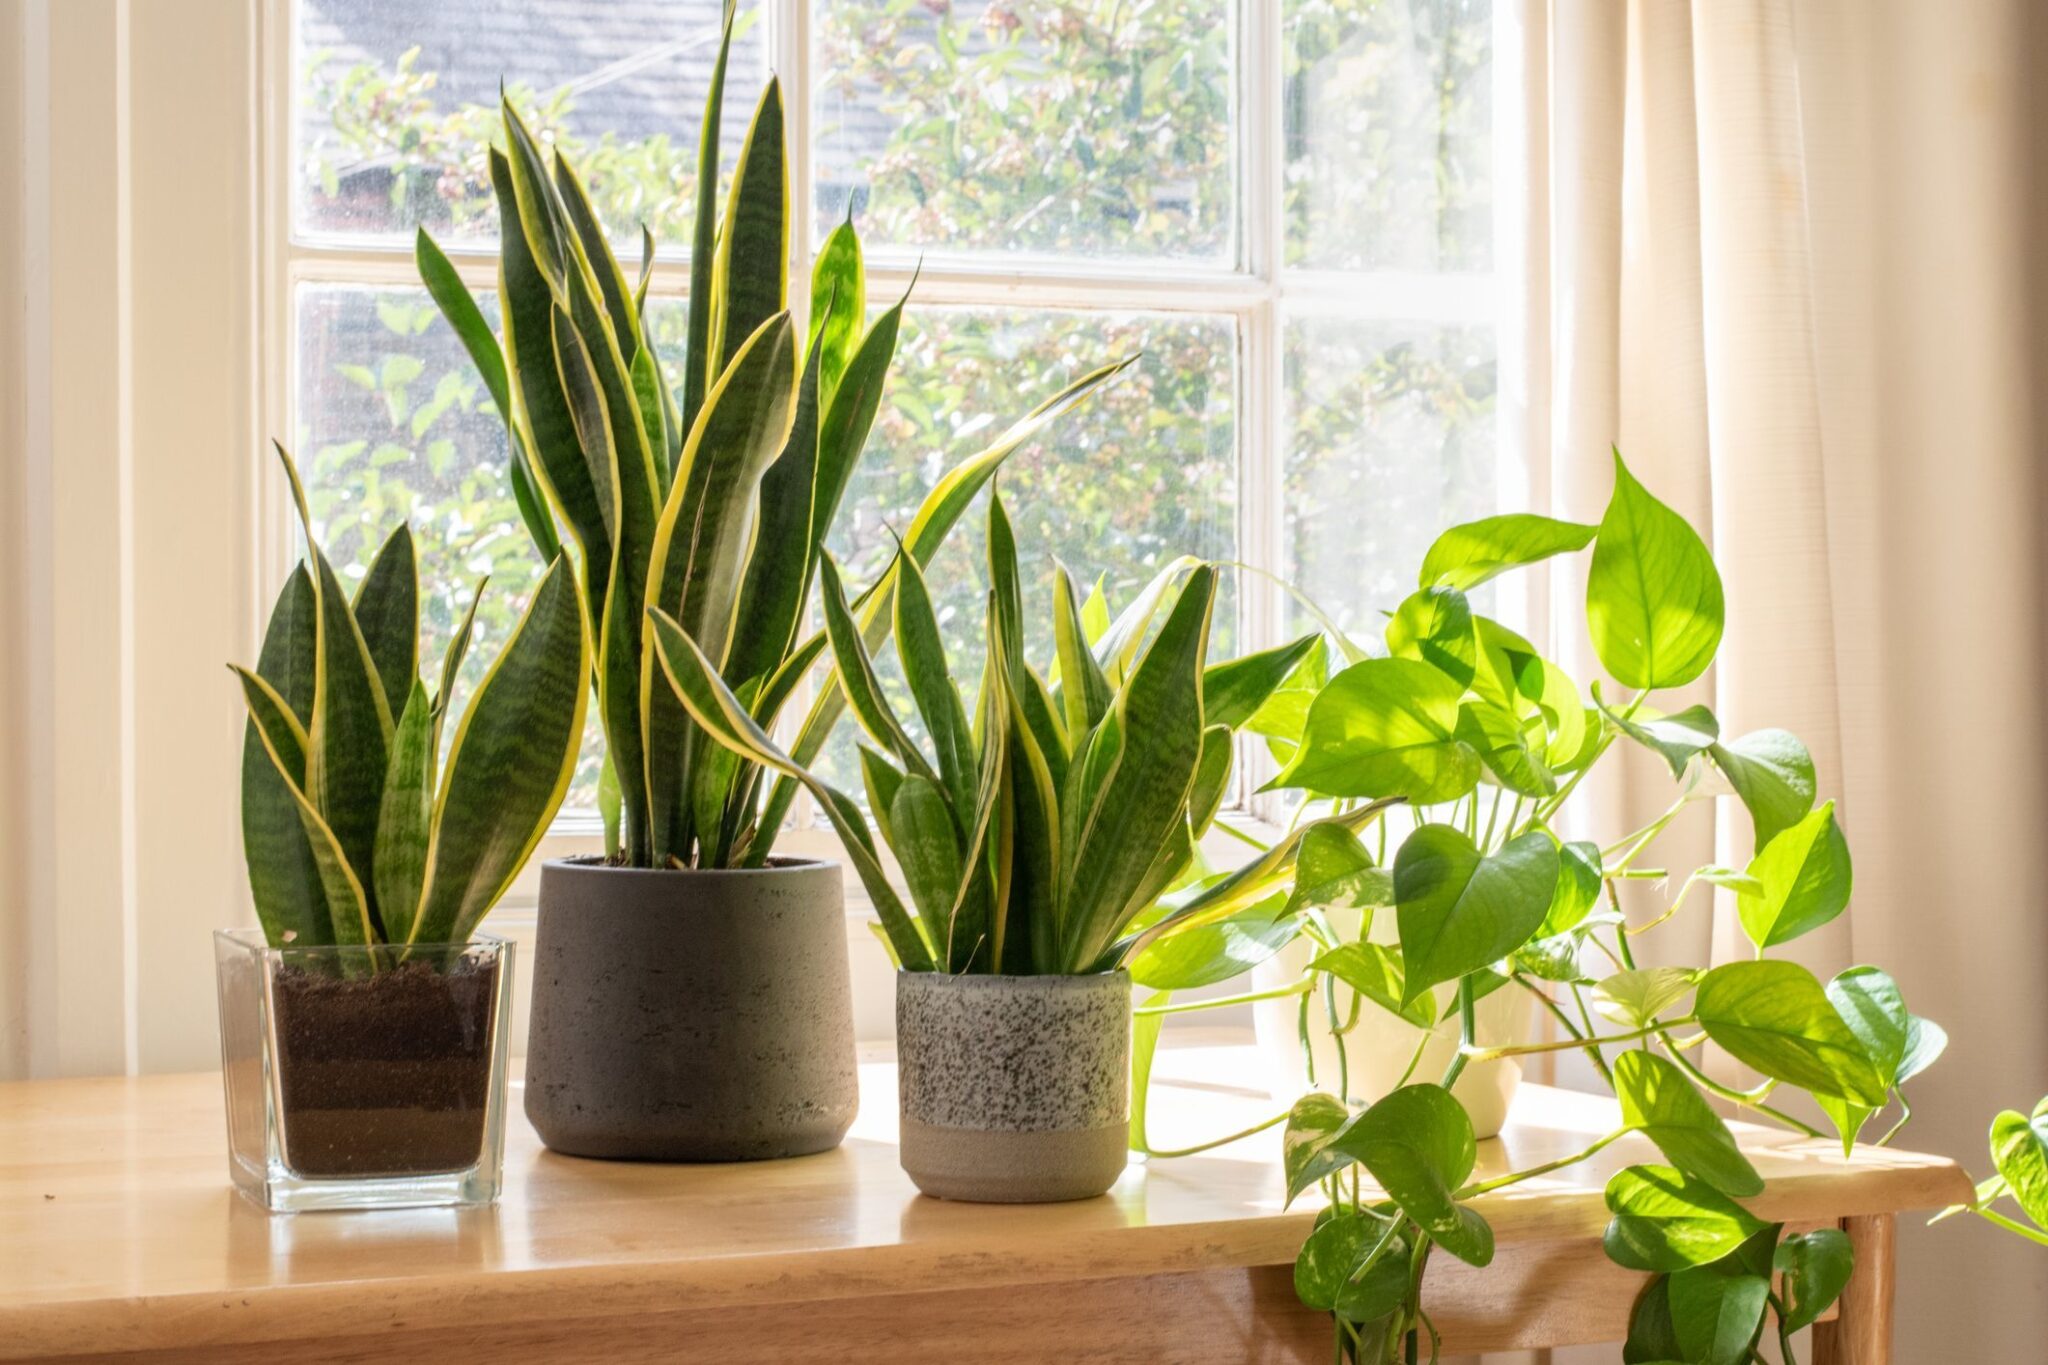 Three potted plants in front of a window.